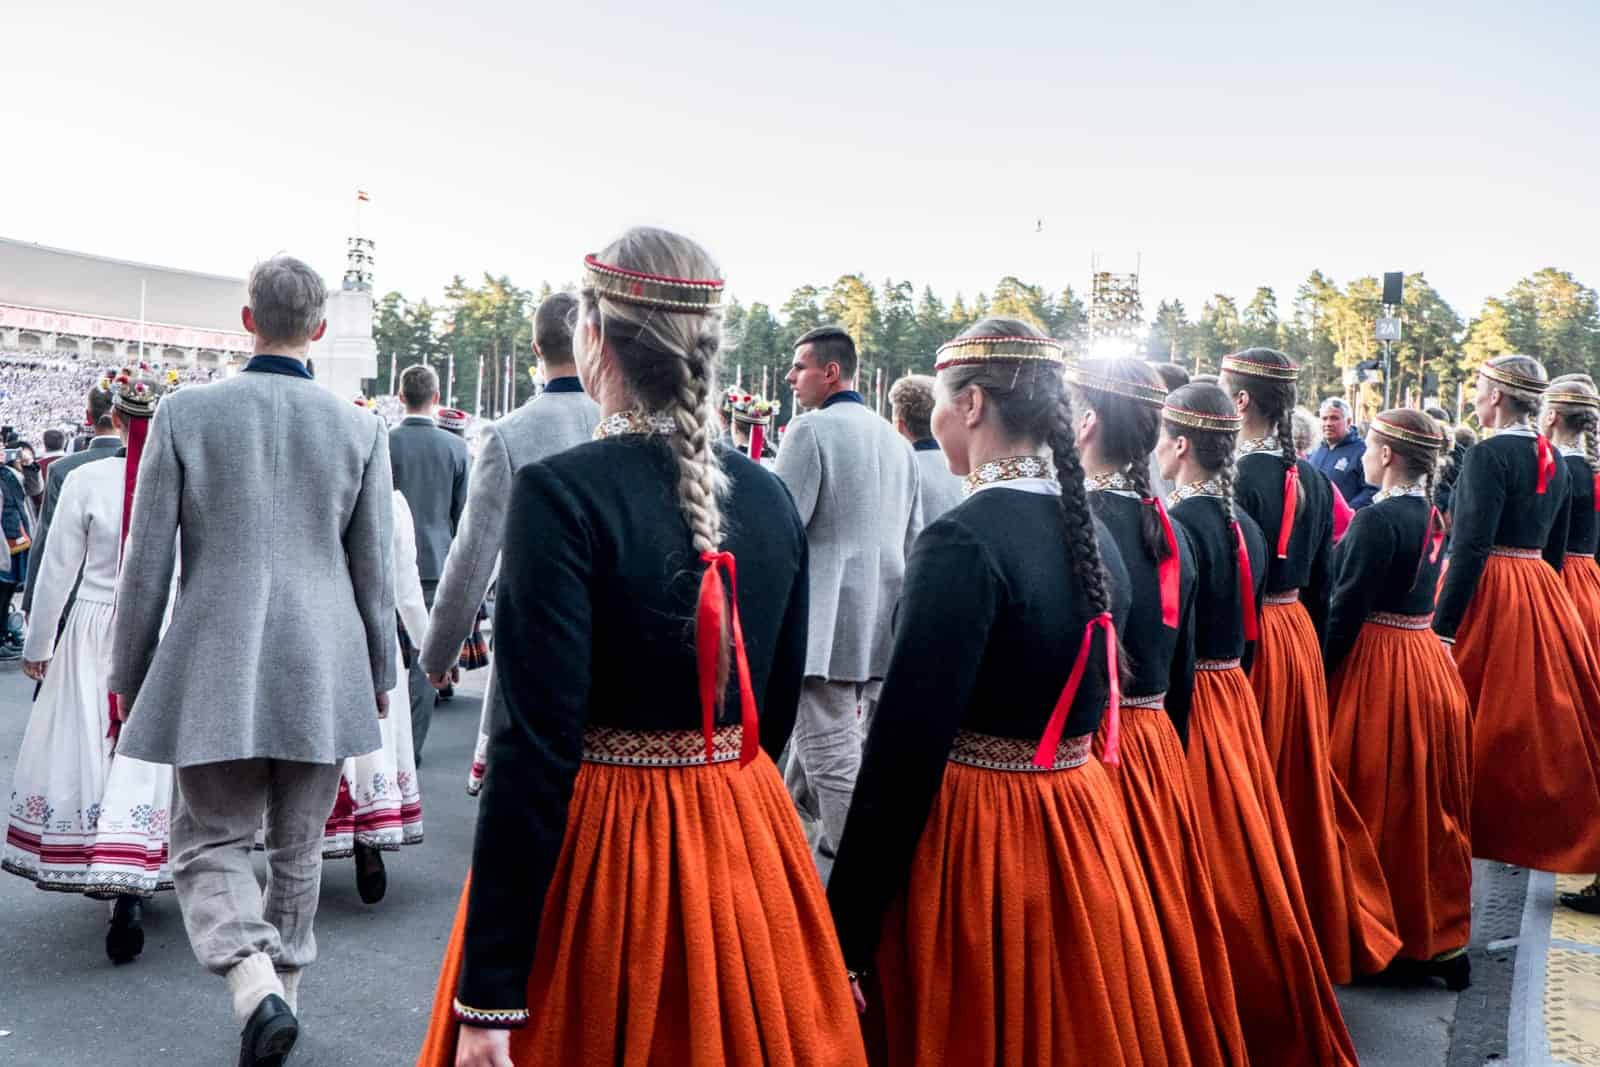 Choir singers wait to enter the stage at the Closing show of the Latvia Song and Dance Celebration